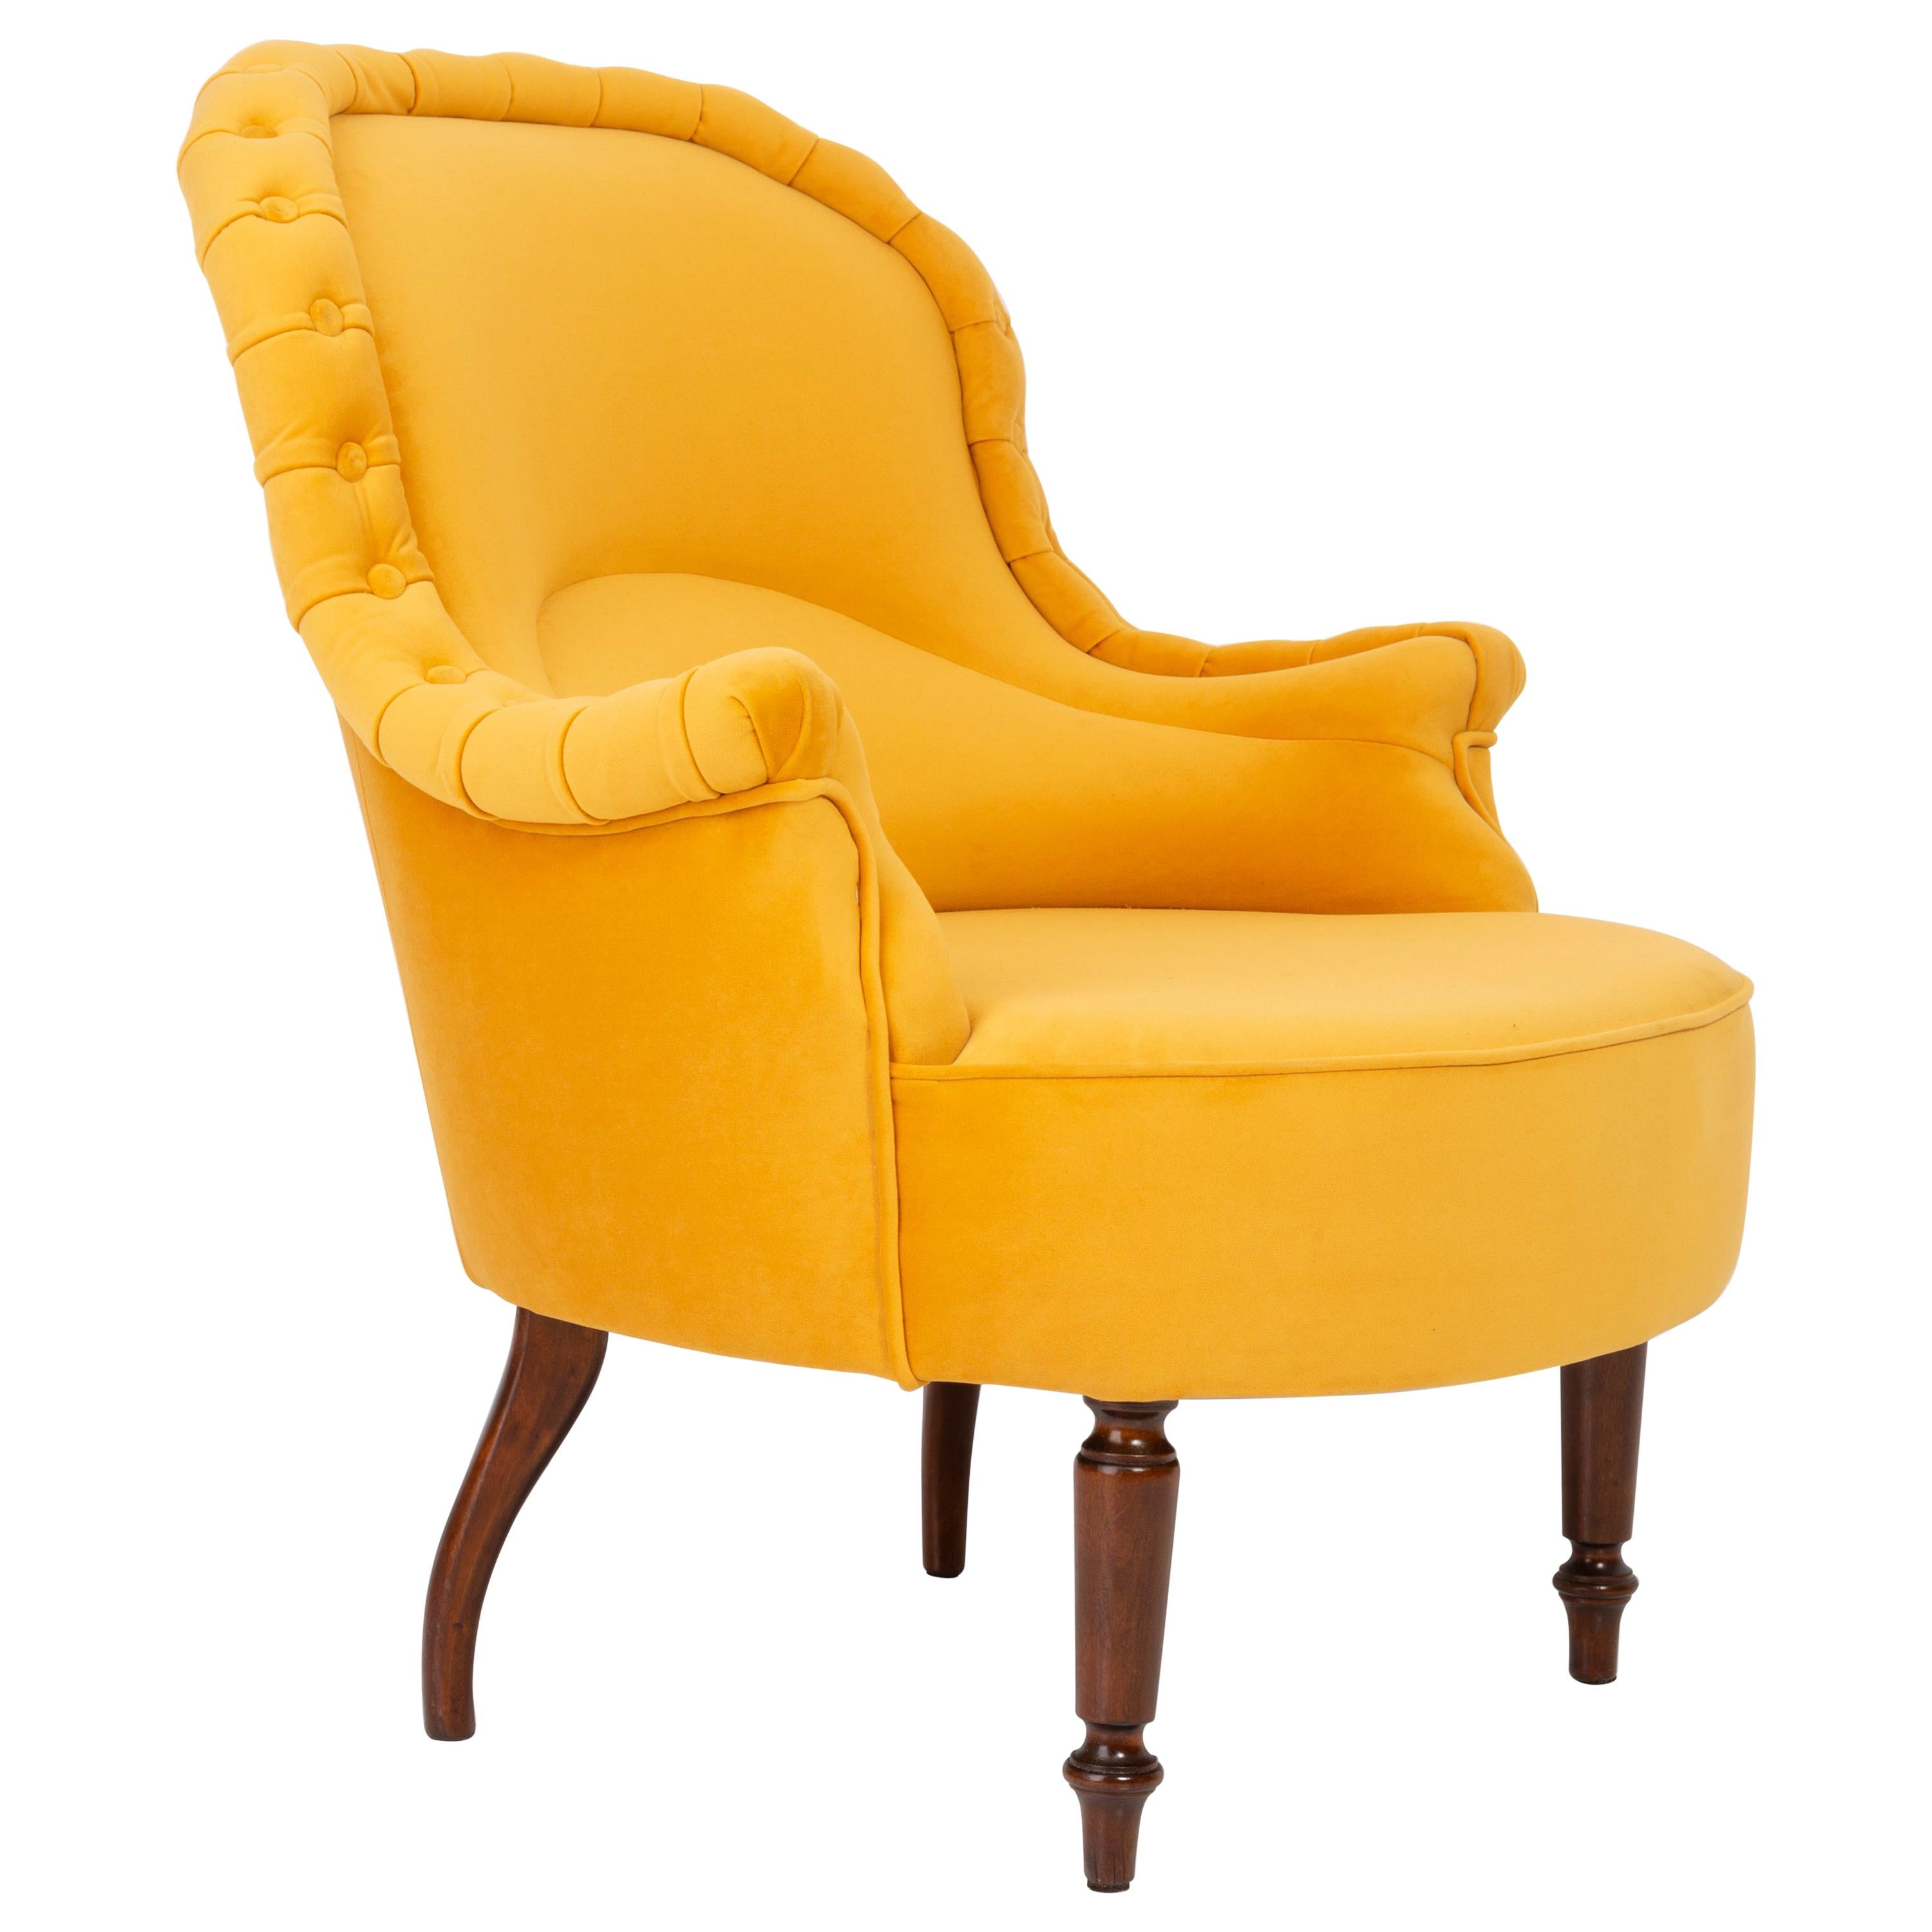 Unique Yellow Mustard Armchair, 1930s, Germany For Sale